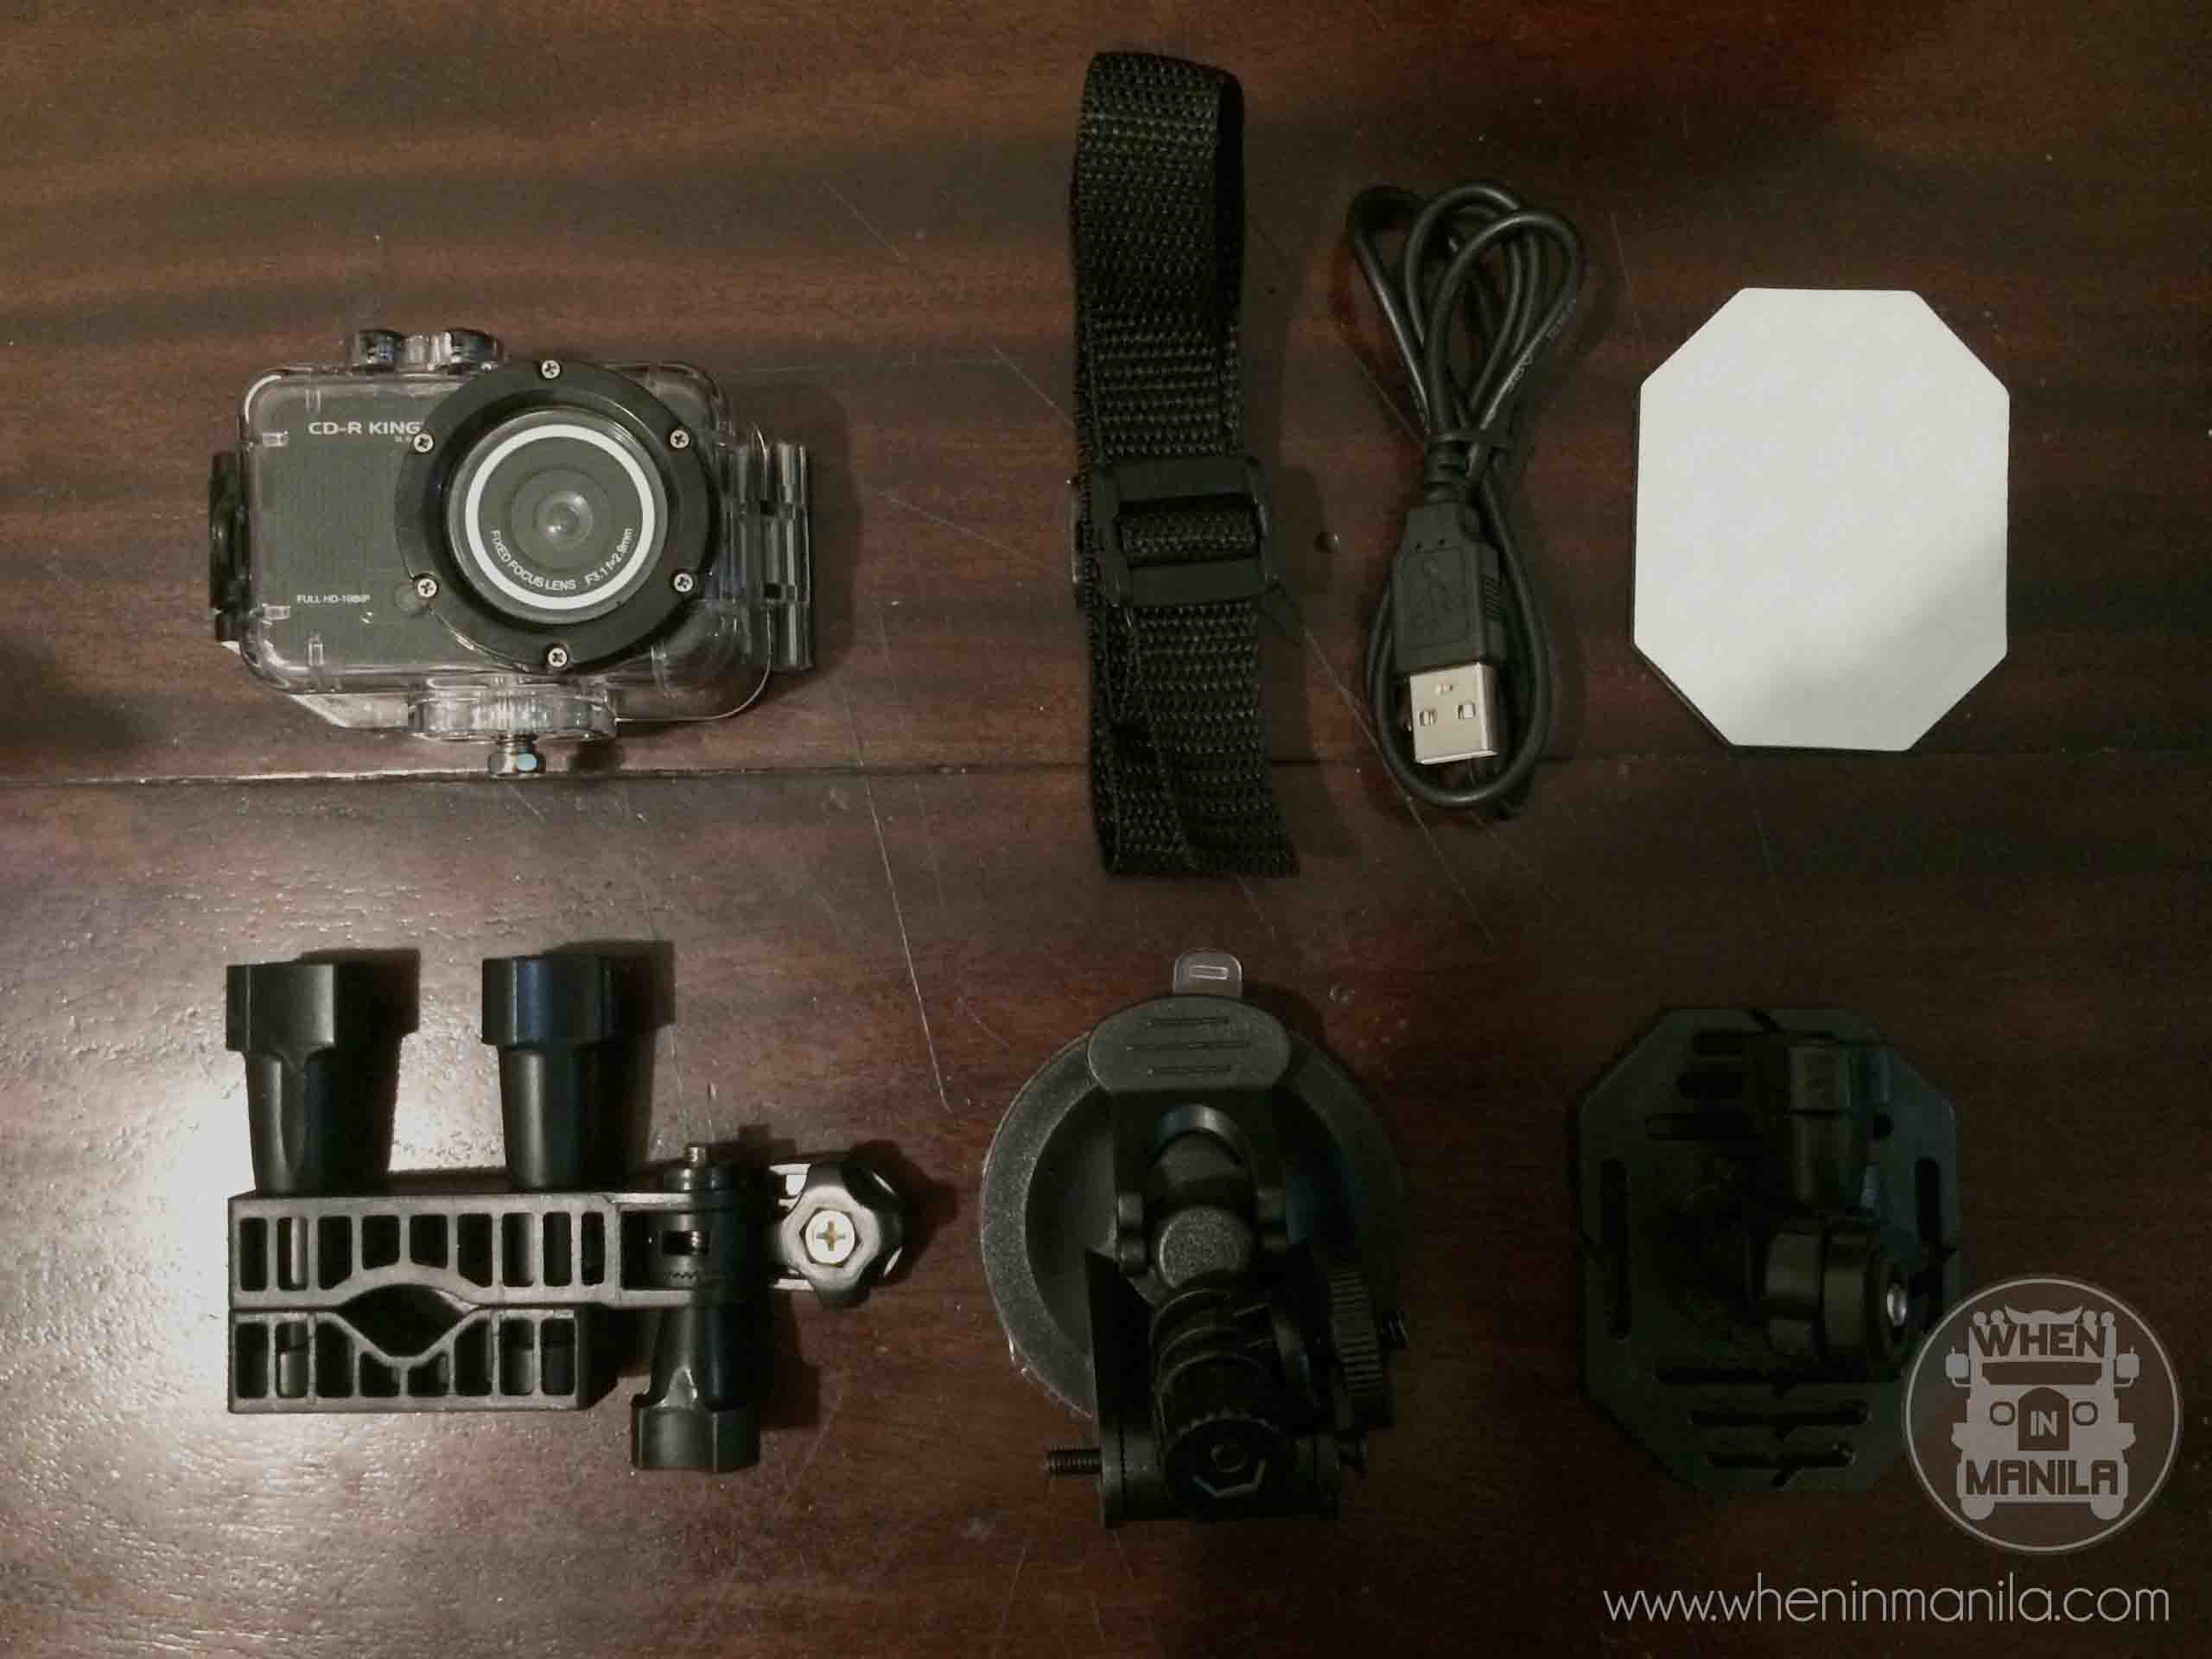 Mount Pulag, Cdr King, Action Camera, Go Pro alternative, CDR King Action Camcorder, Water proof Camera